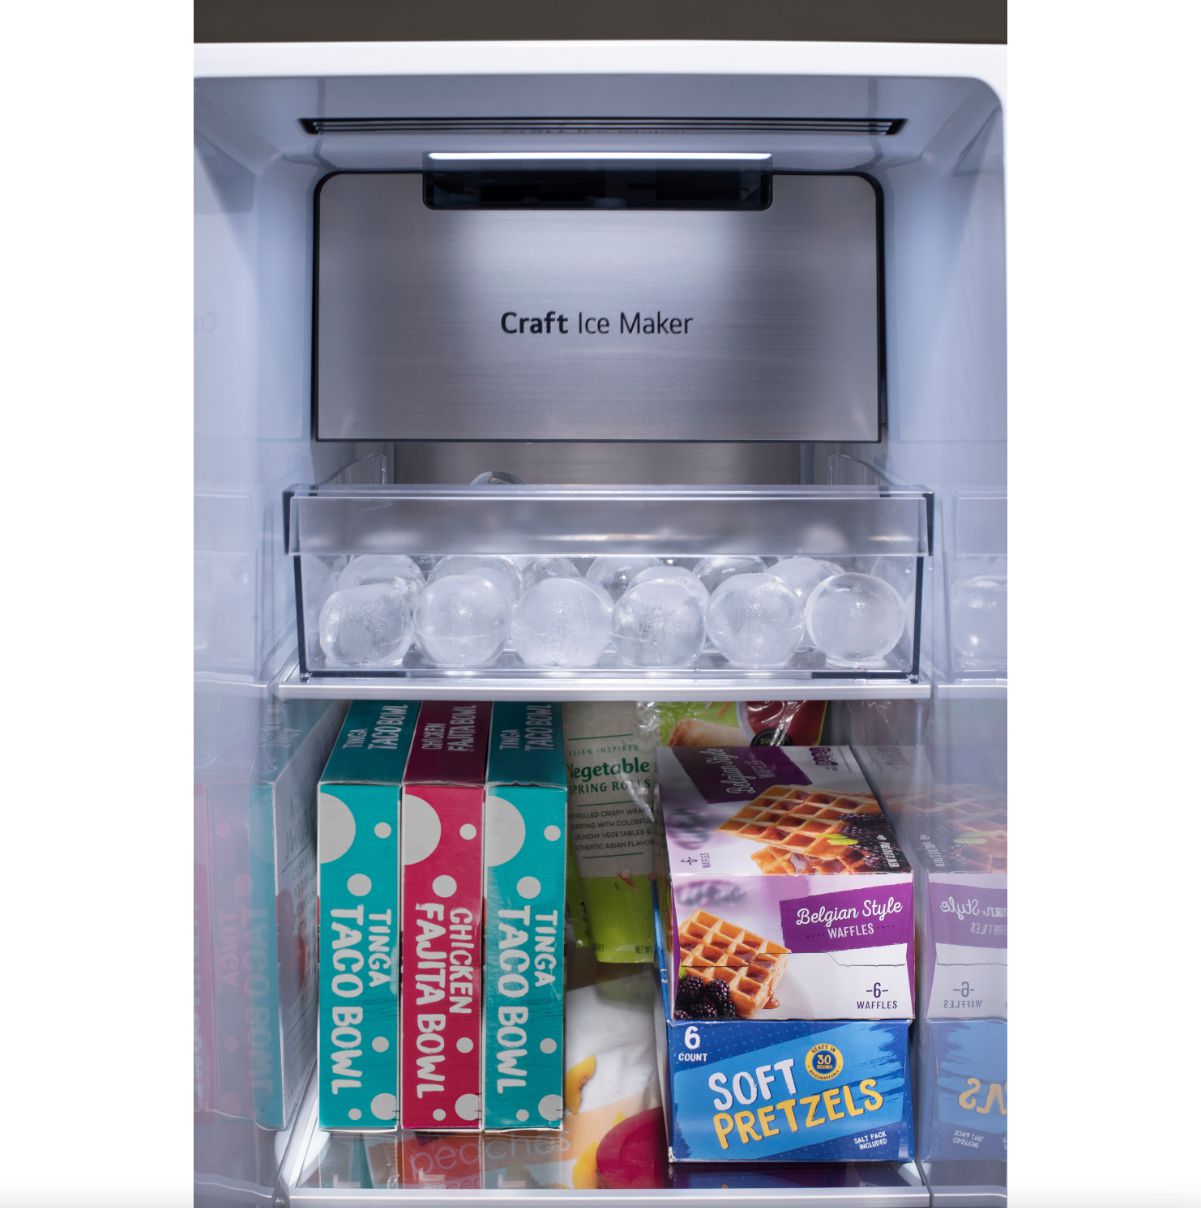 LG 36 Inch 23-Cu. Ft. Side-by-Side Counter-Depth InstaView Refrigerator with Craft Ice in Black Stainless 23 Cu. Ft. (LRSOC2306D)